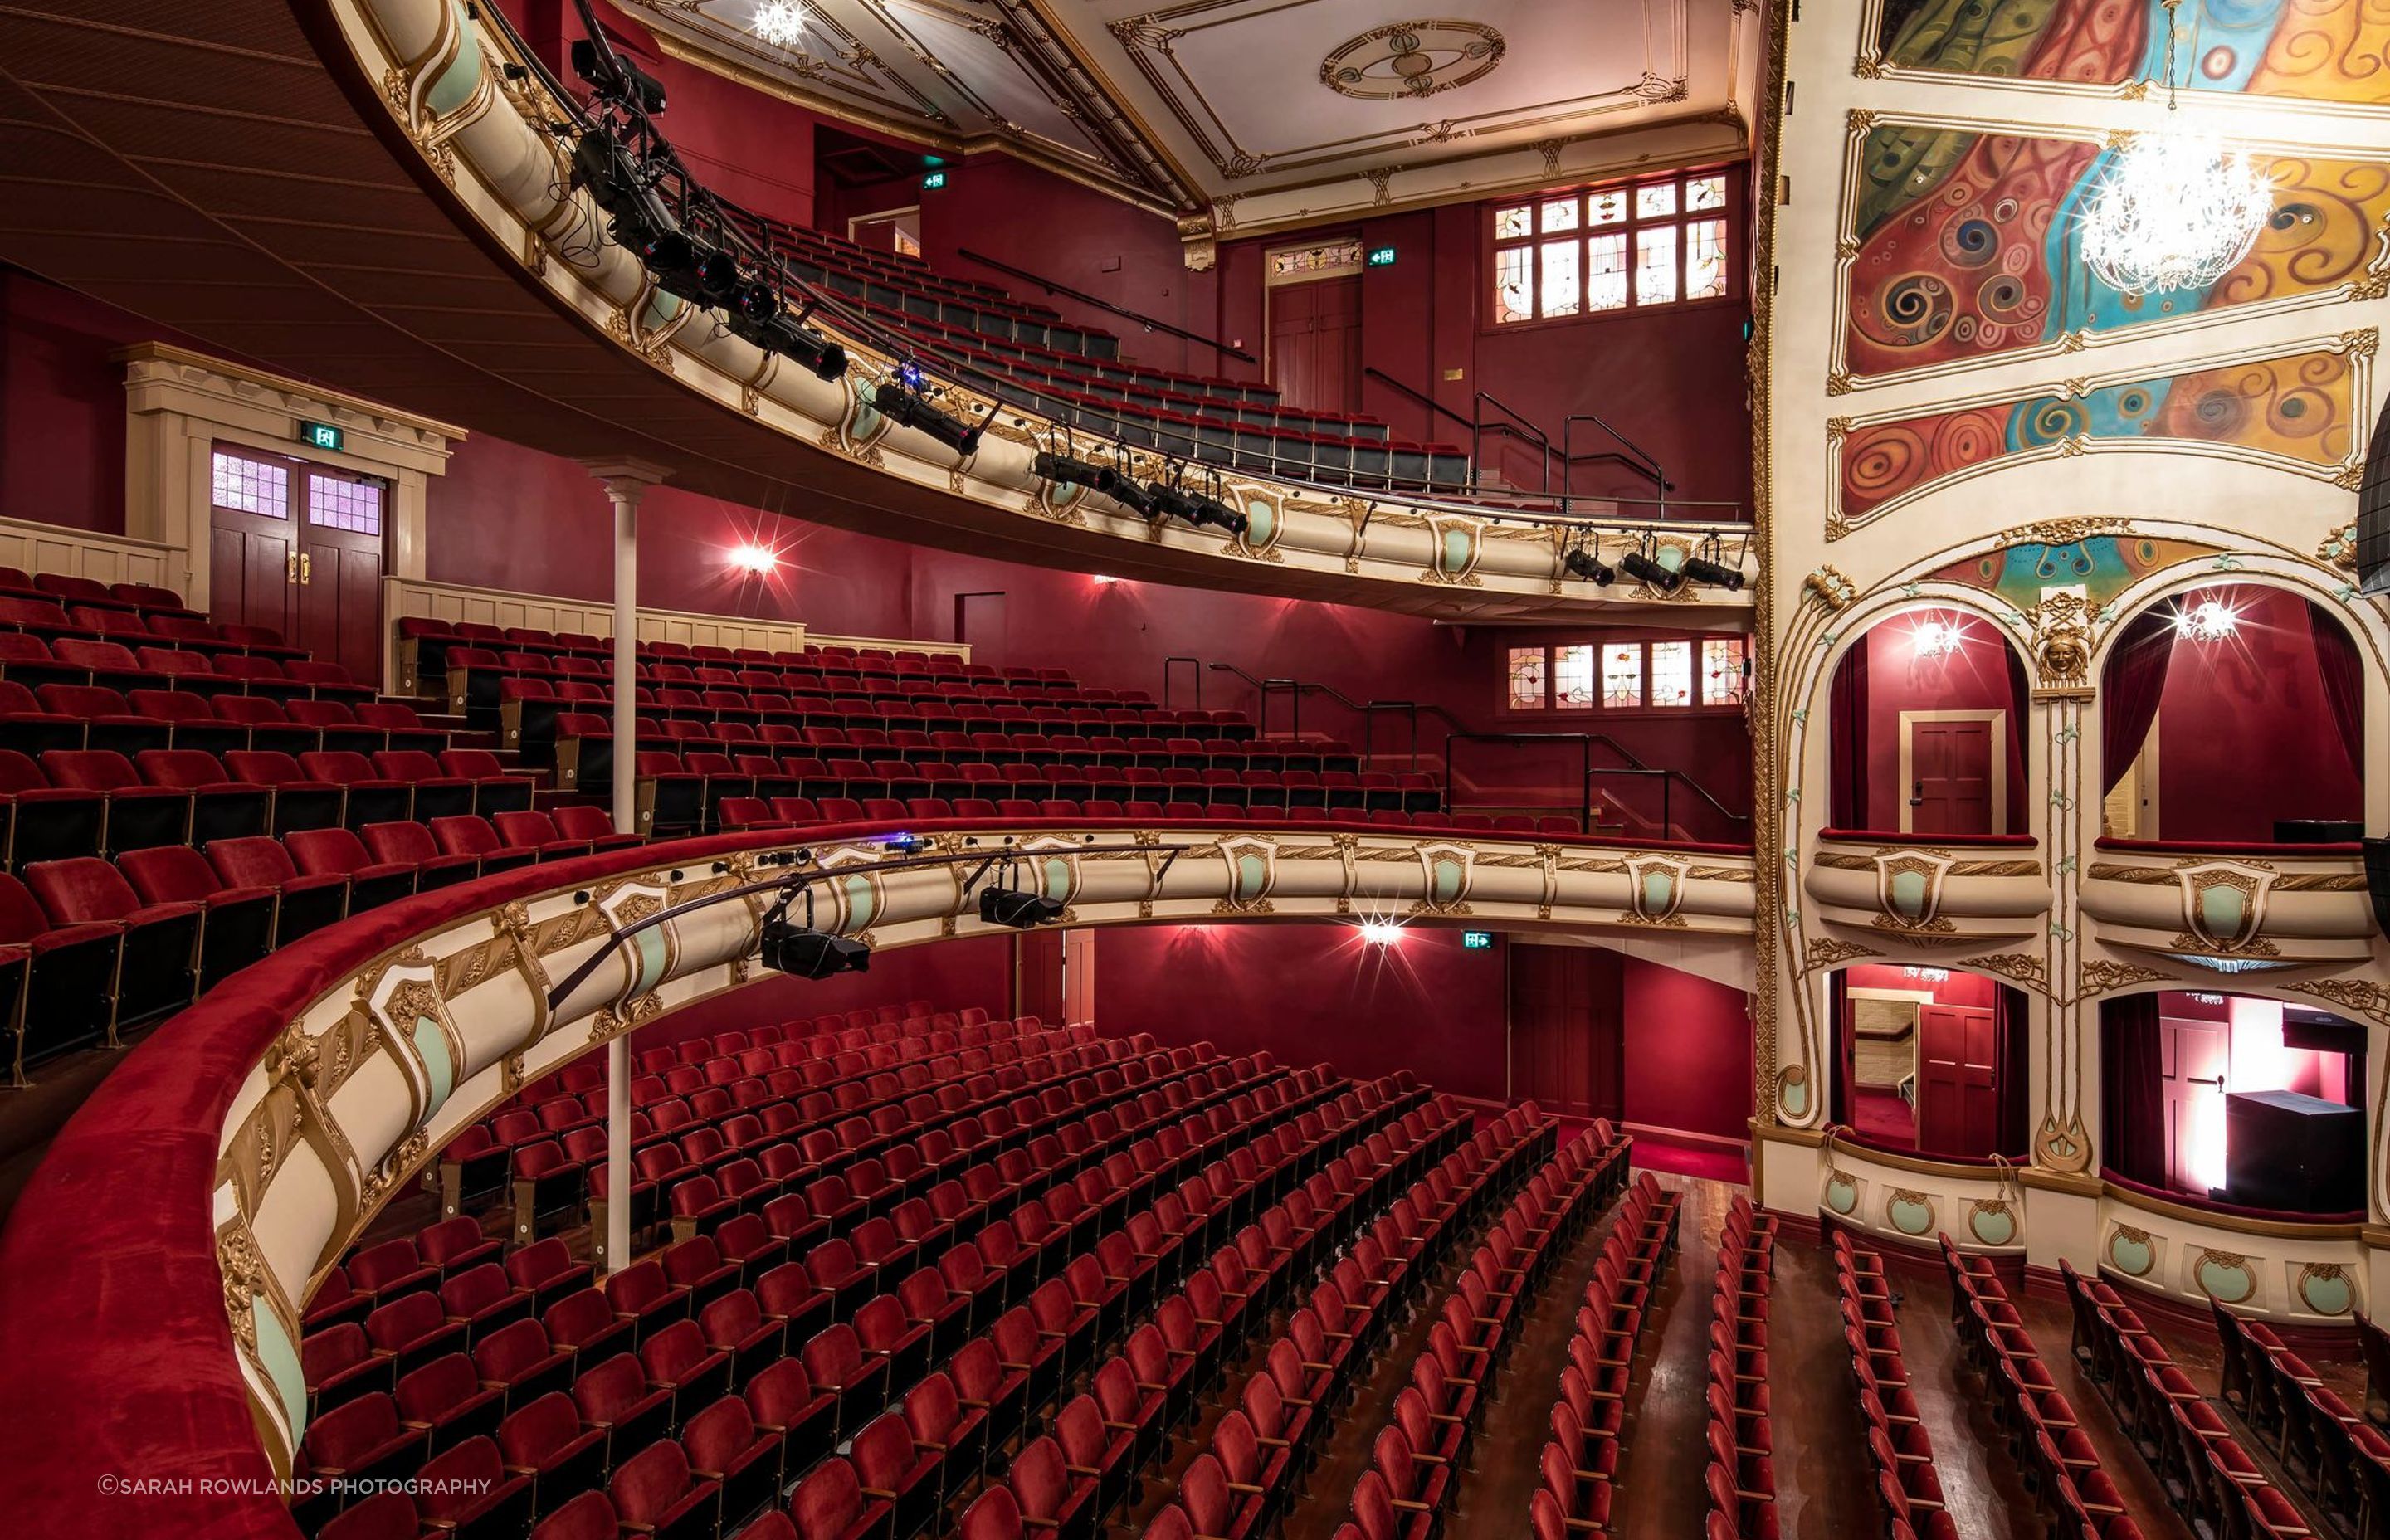 “As specialists in heritage architecture, our first priority was to ensure minimal damage was done to the theatre’s historical aspects while the upgrade to the seismic structure of the building was being carried out," says Architect Dave Pearson.